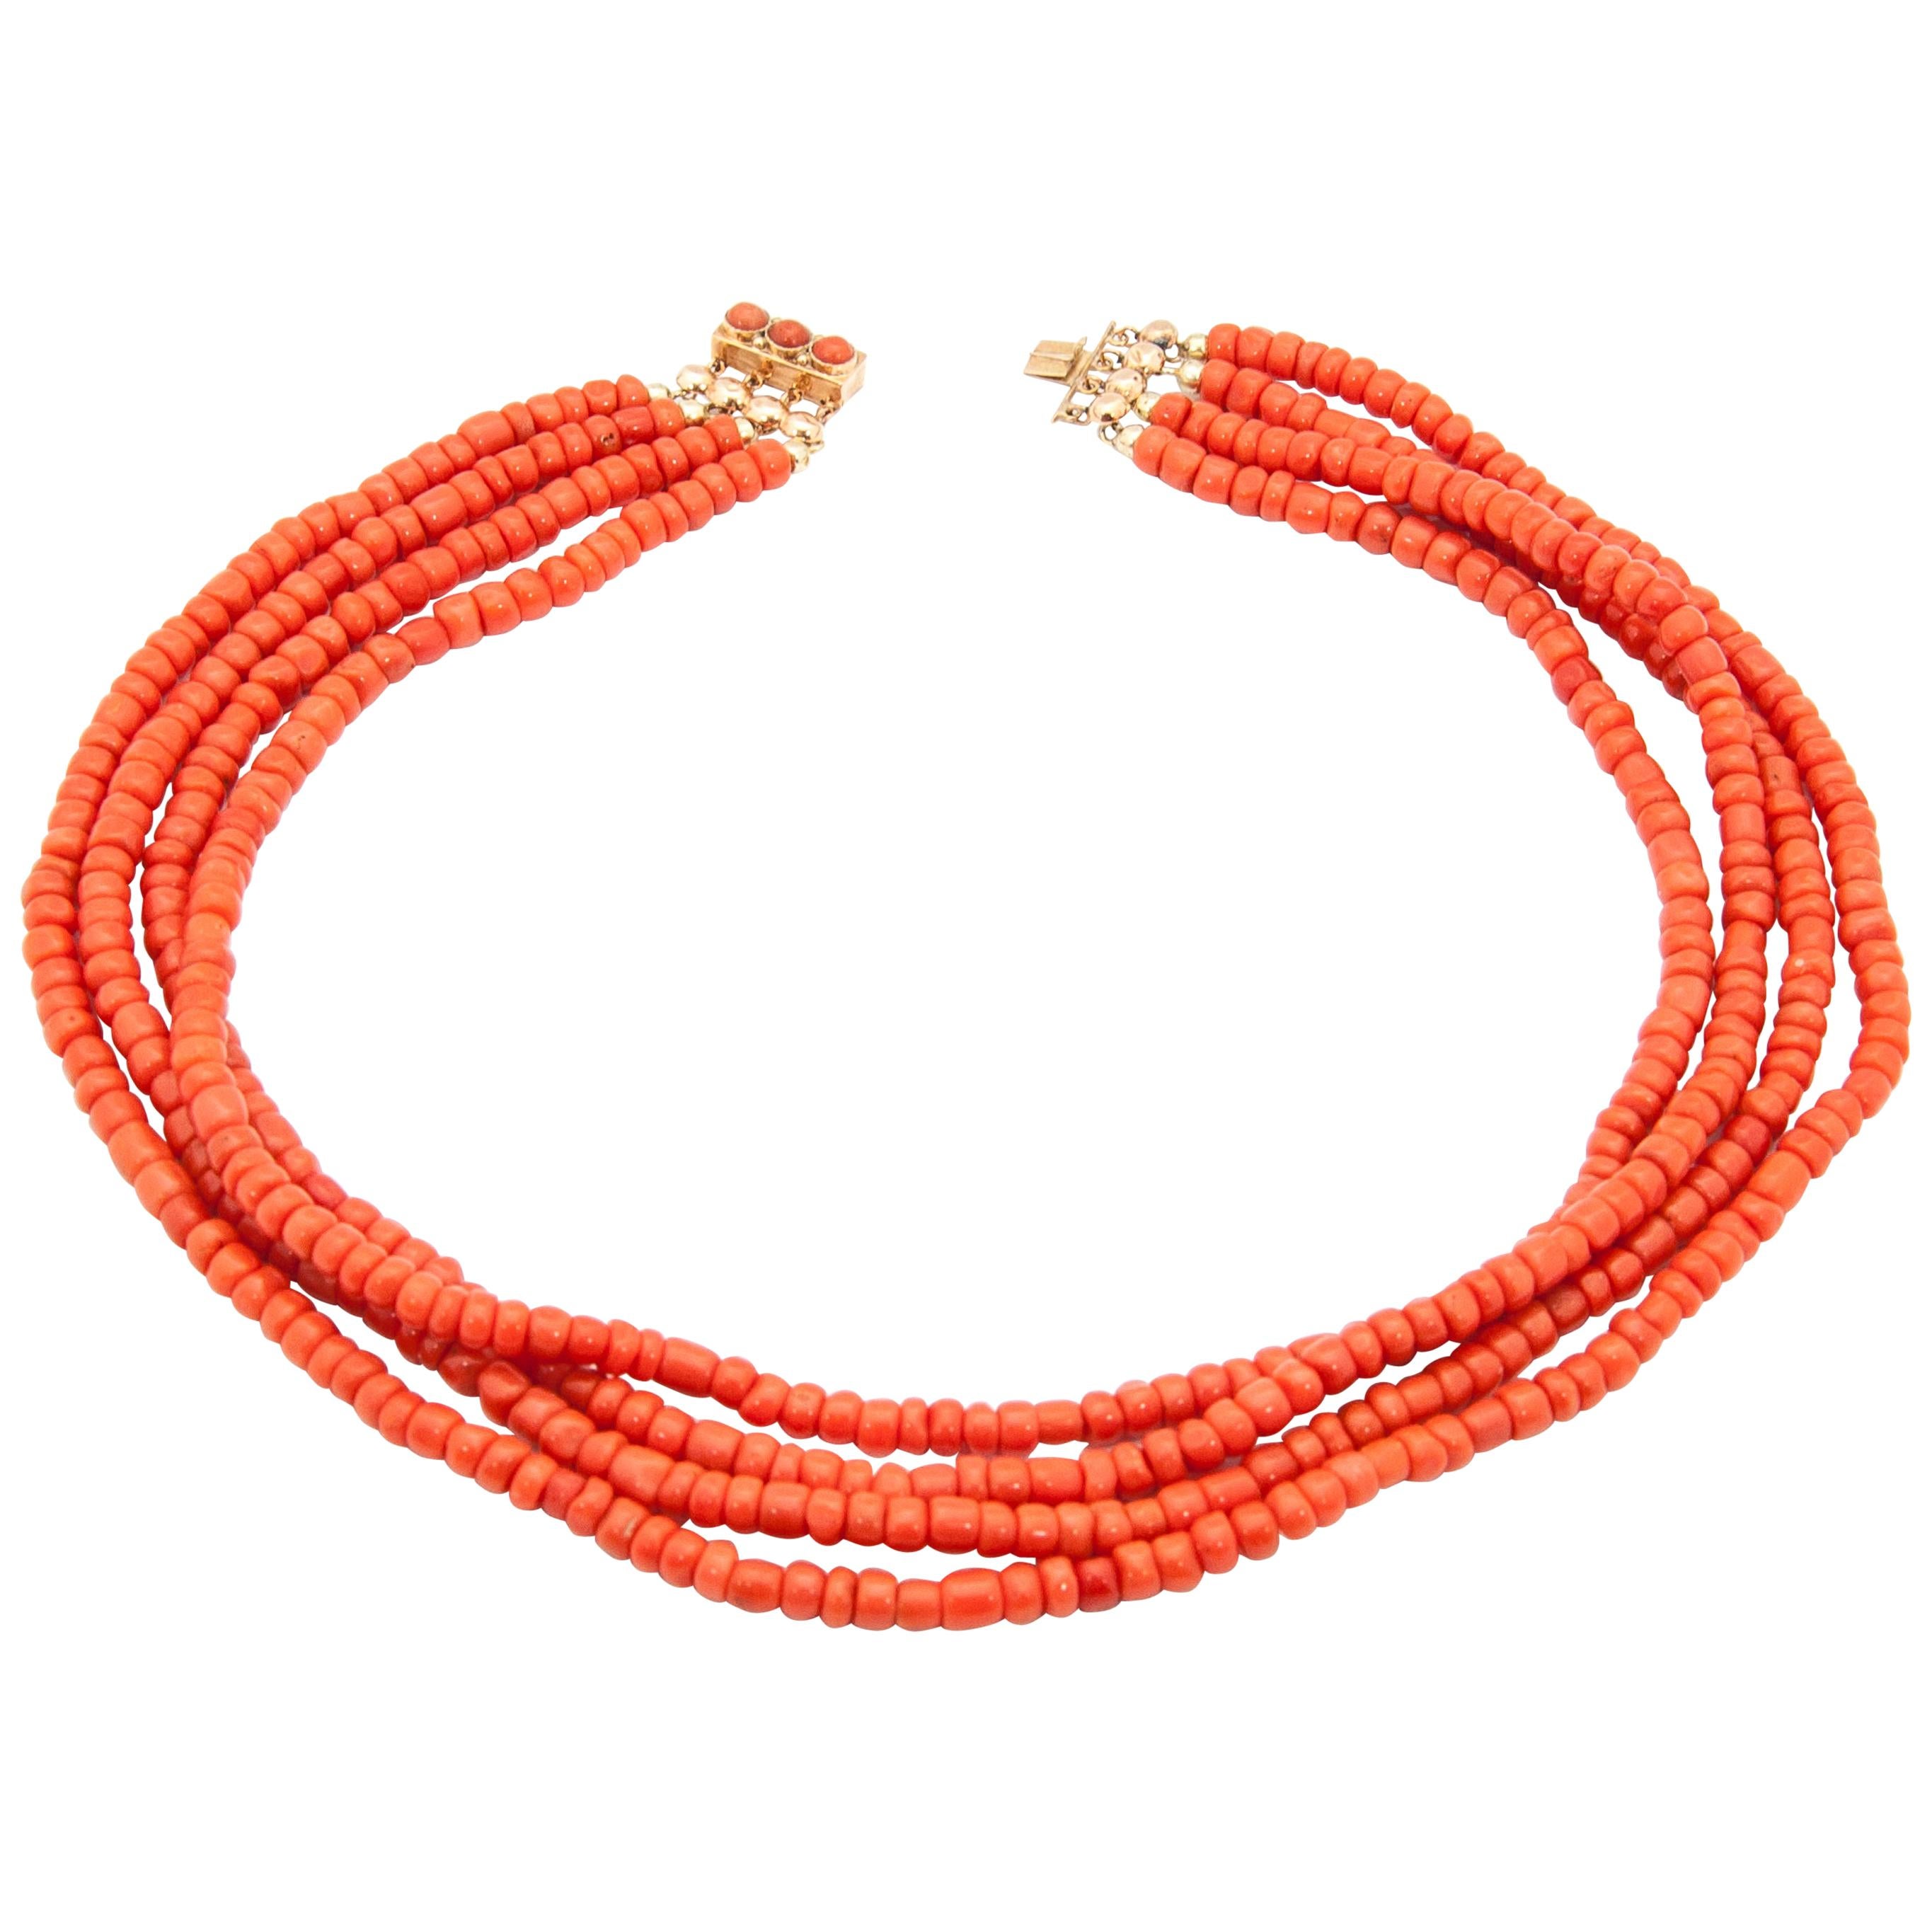 Red Coral Beads Necklace Strand Jewelry 